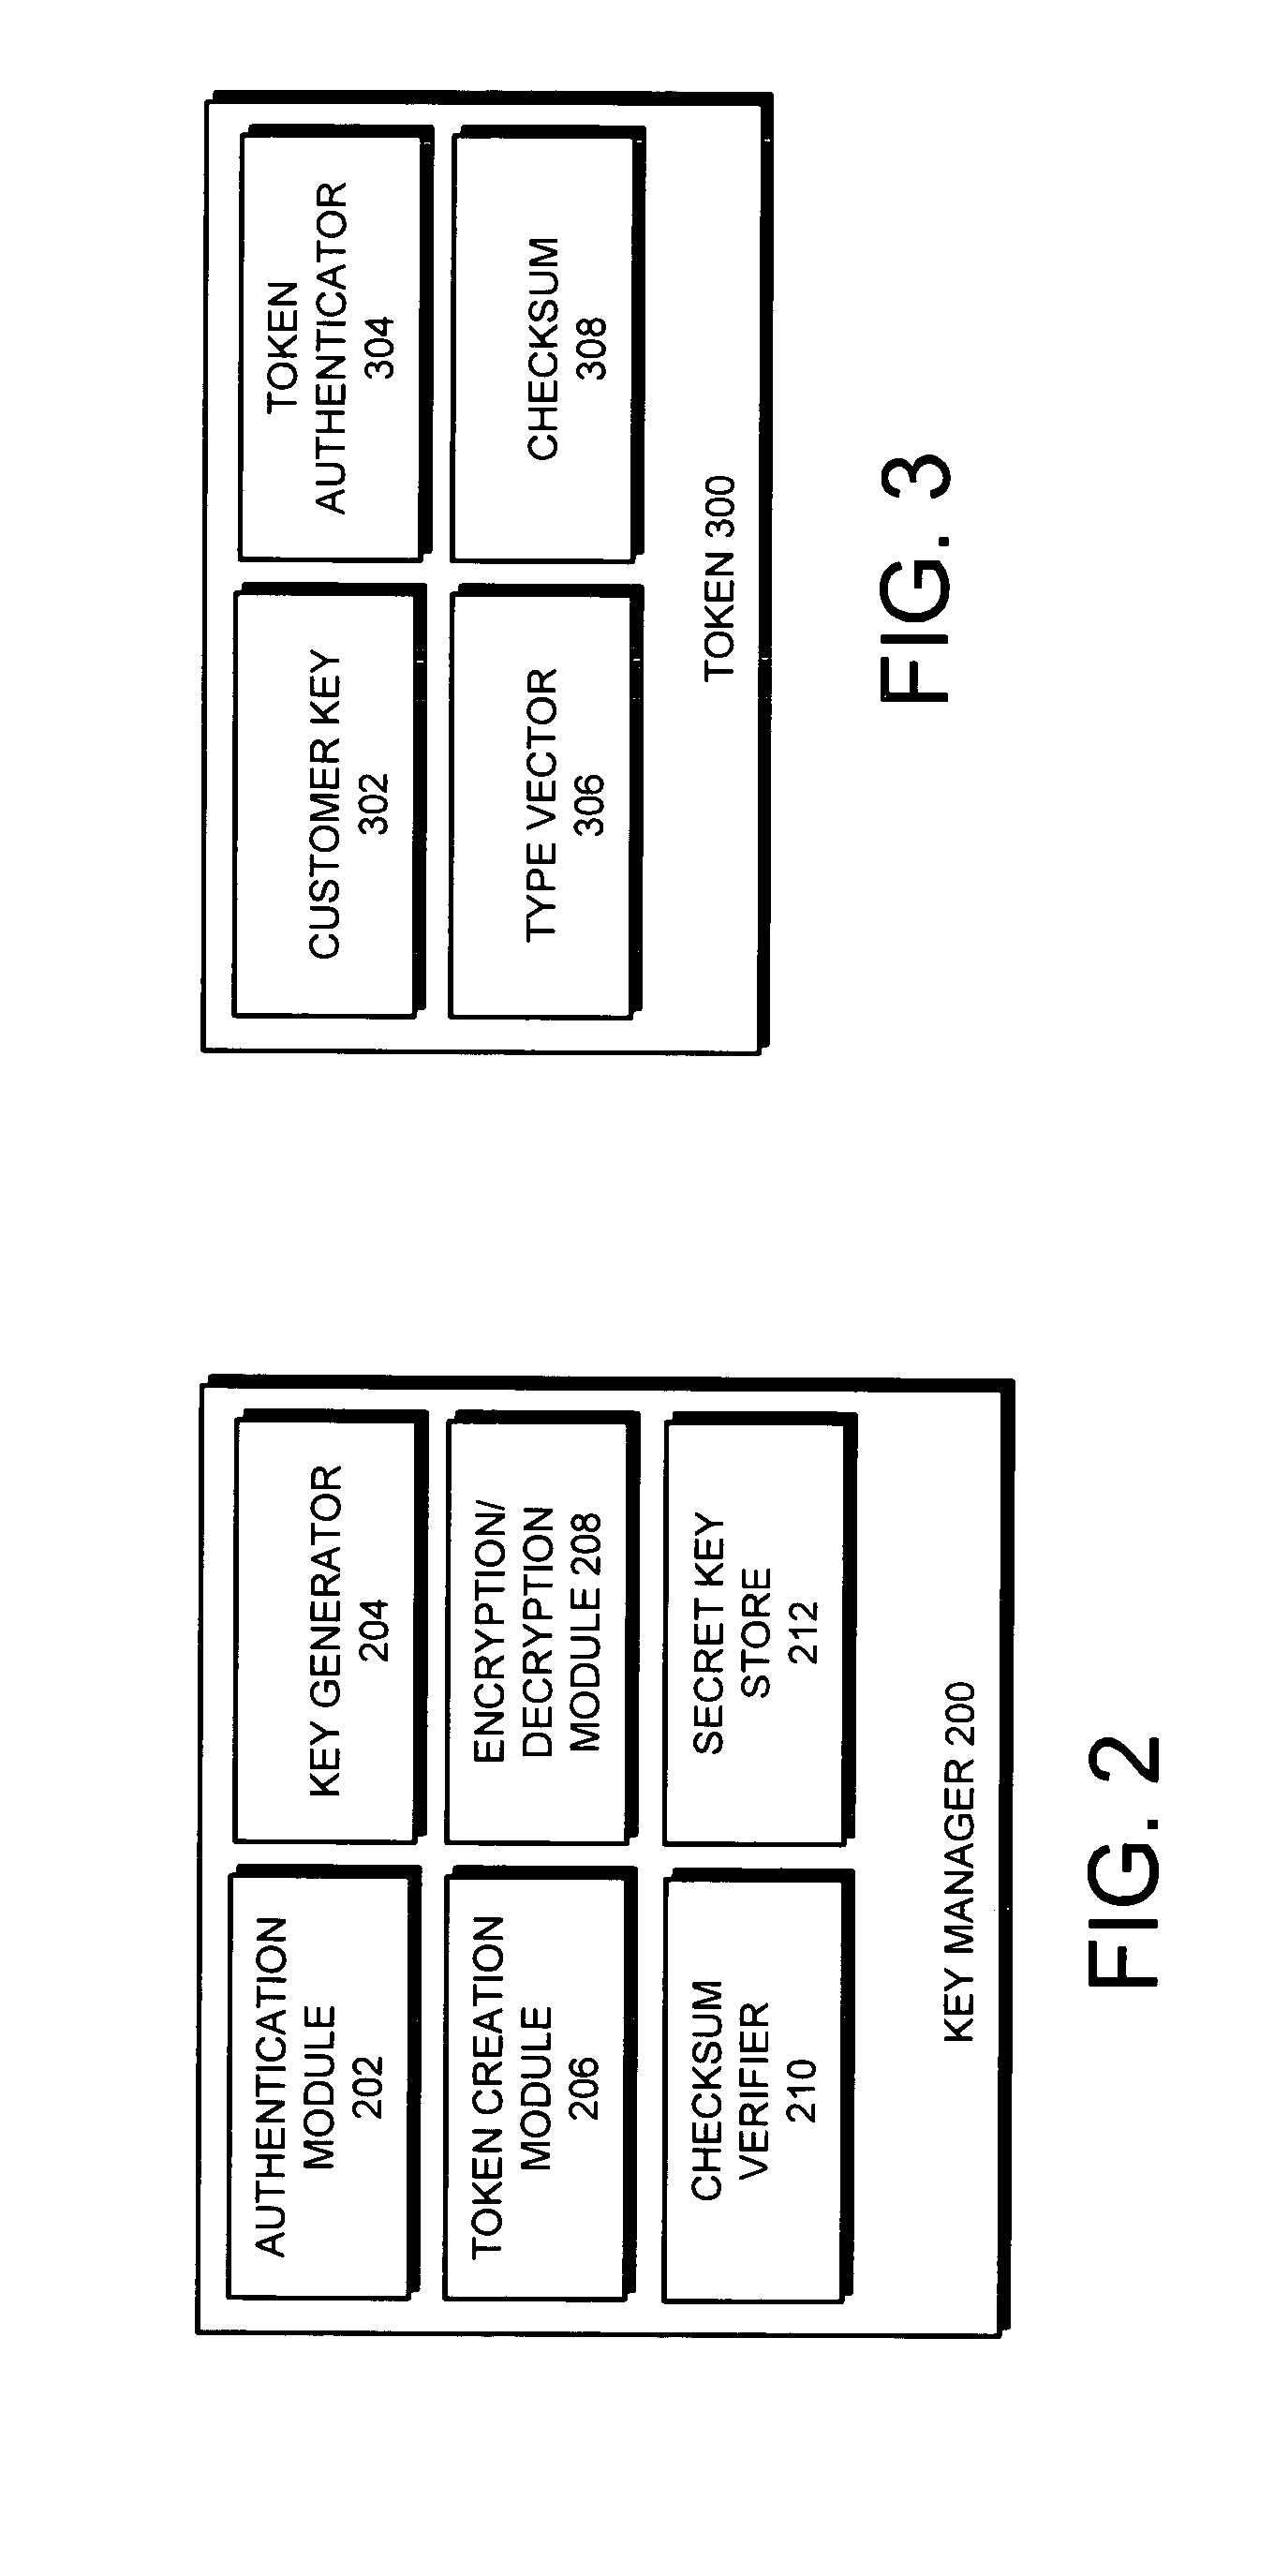 Method and apparatus for managing cryptographic keys